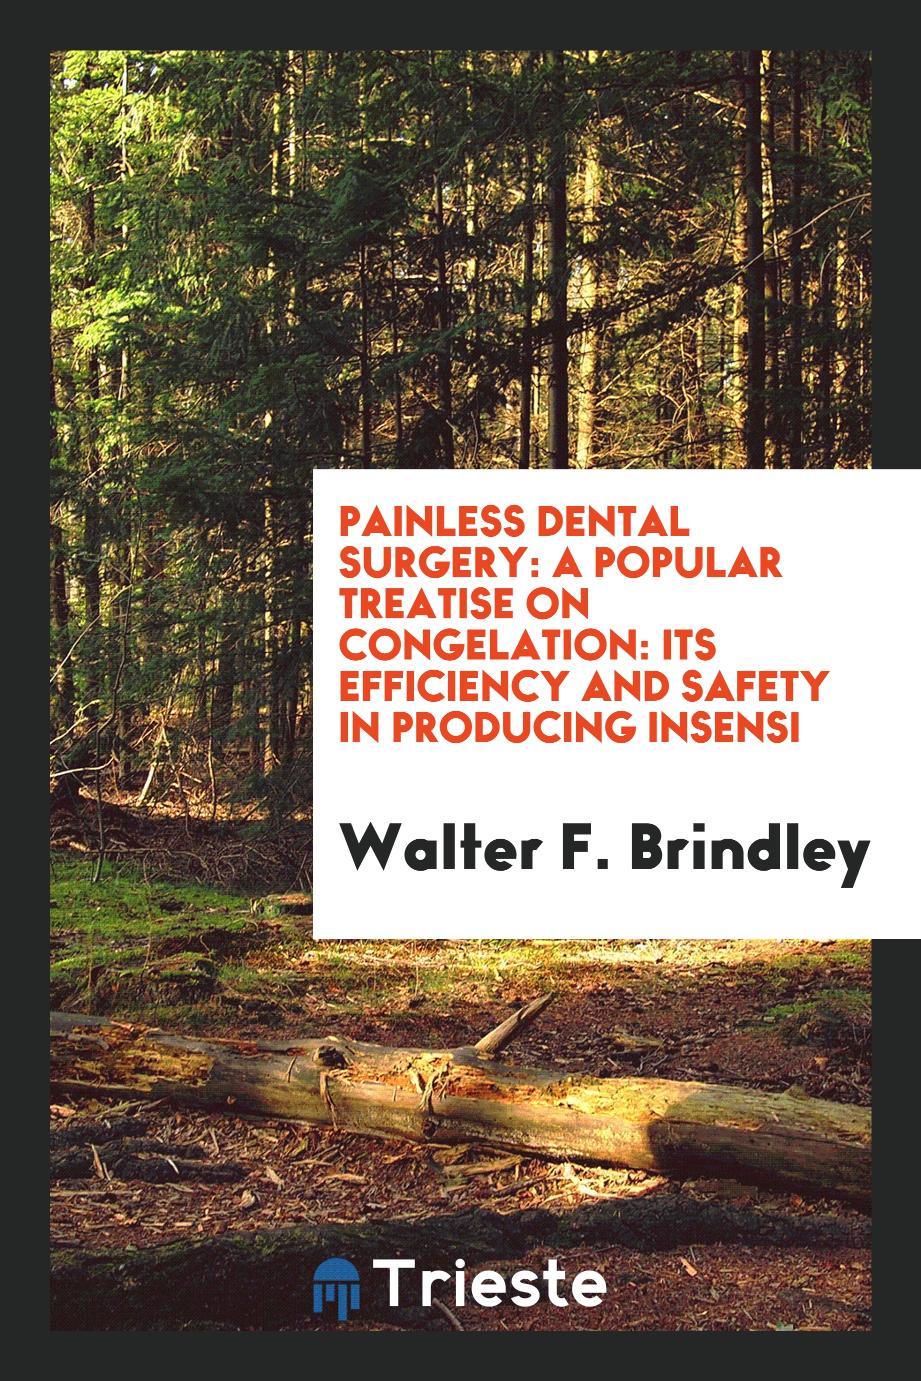 Painless dental surgery: A Popular Treatise on Congelation: Its Efficiency and Safety in producing insensi